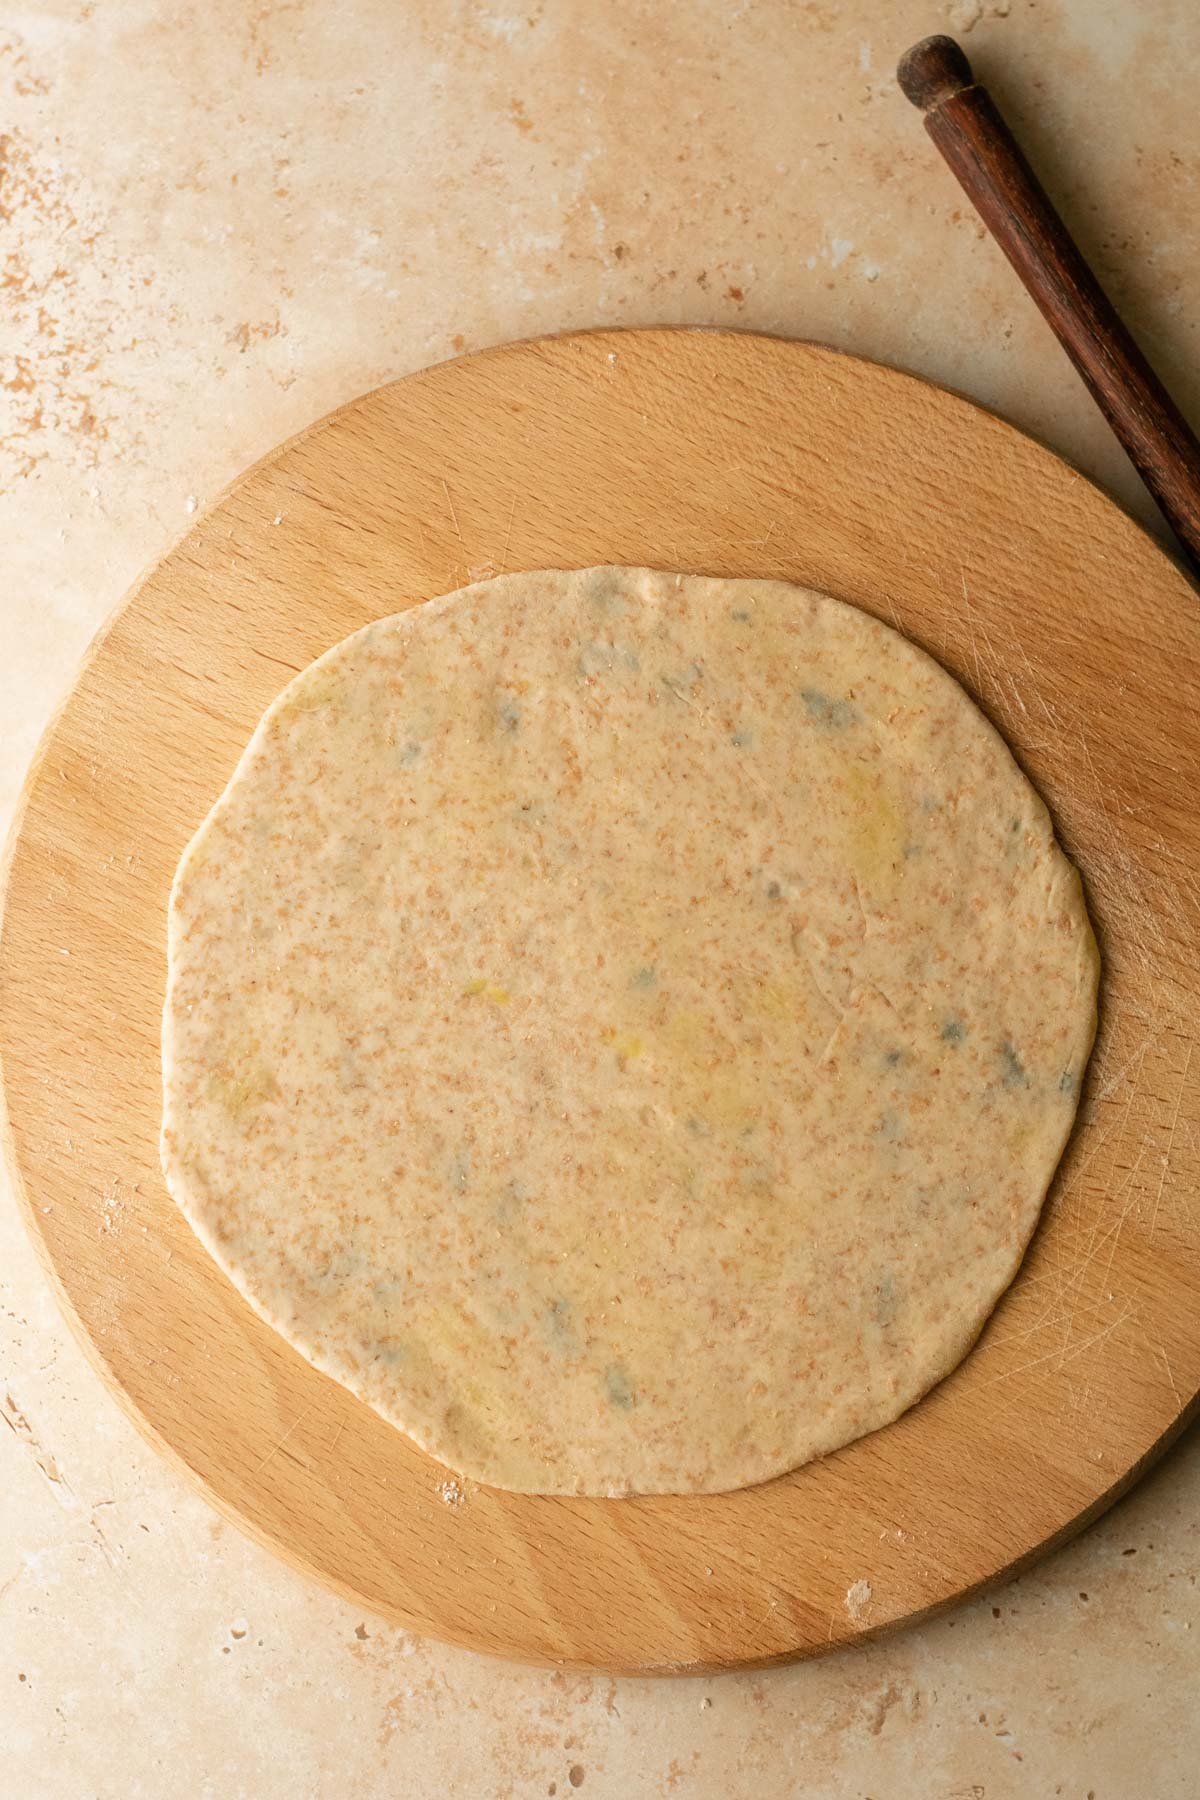 a rolled out aloo paratha ready to be cooked